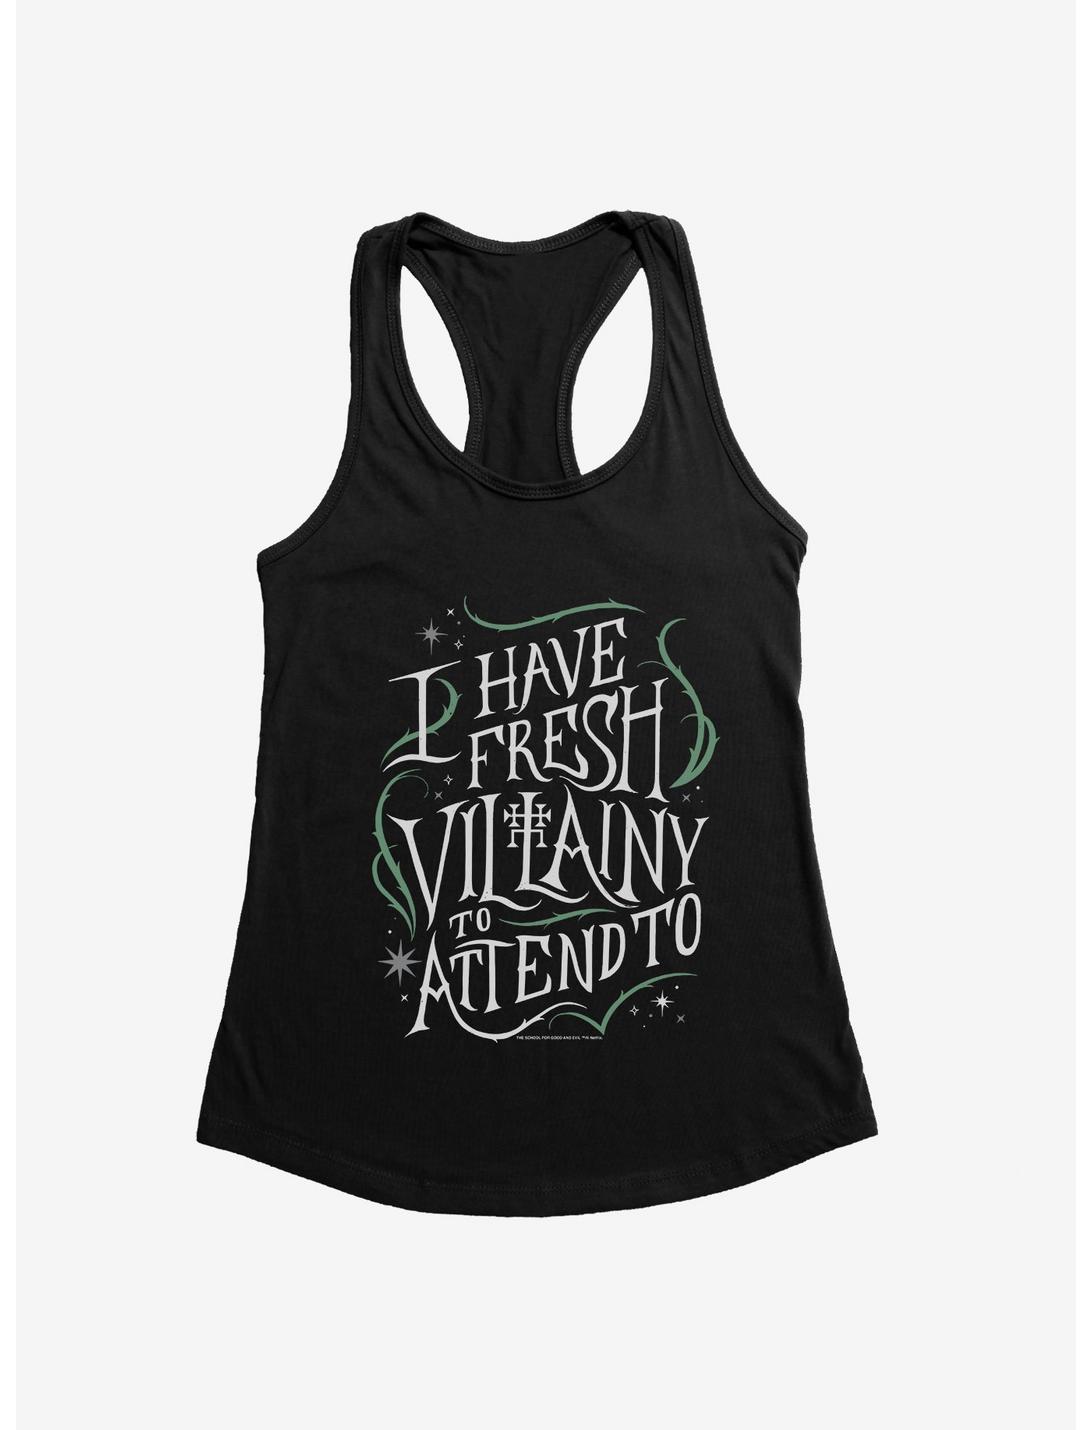 The School For Good And Evil Villainy Womens Tank Top, BLACK, hi-res